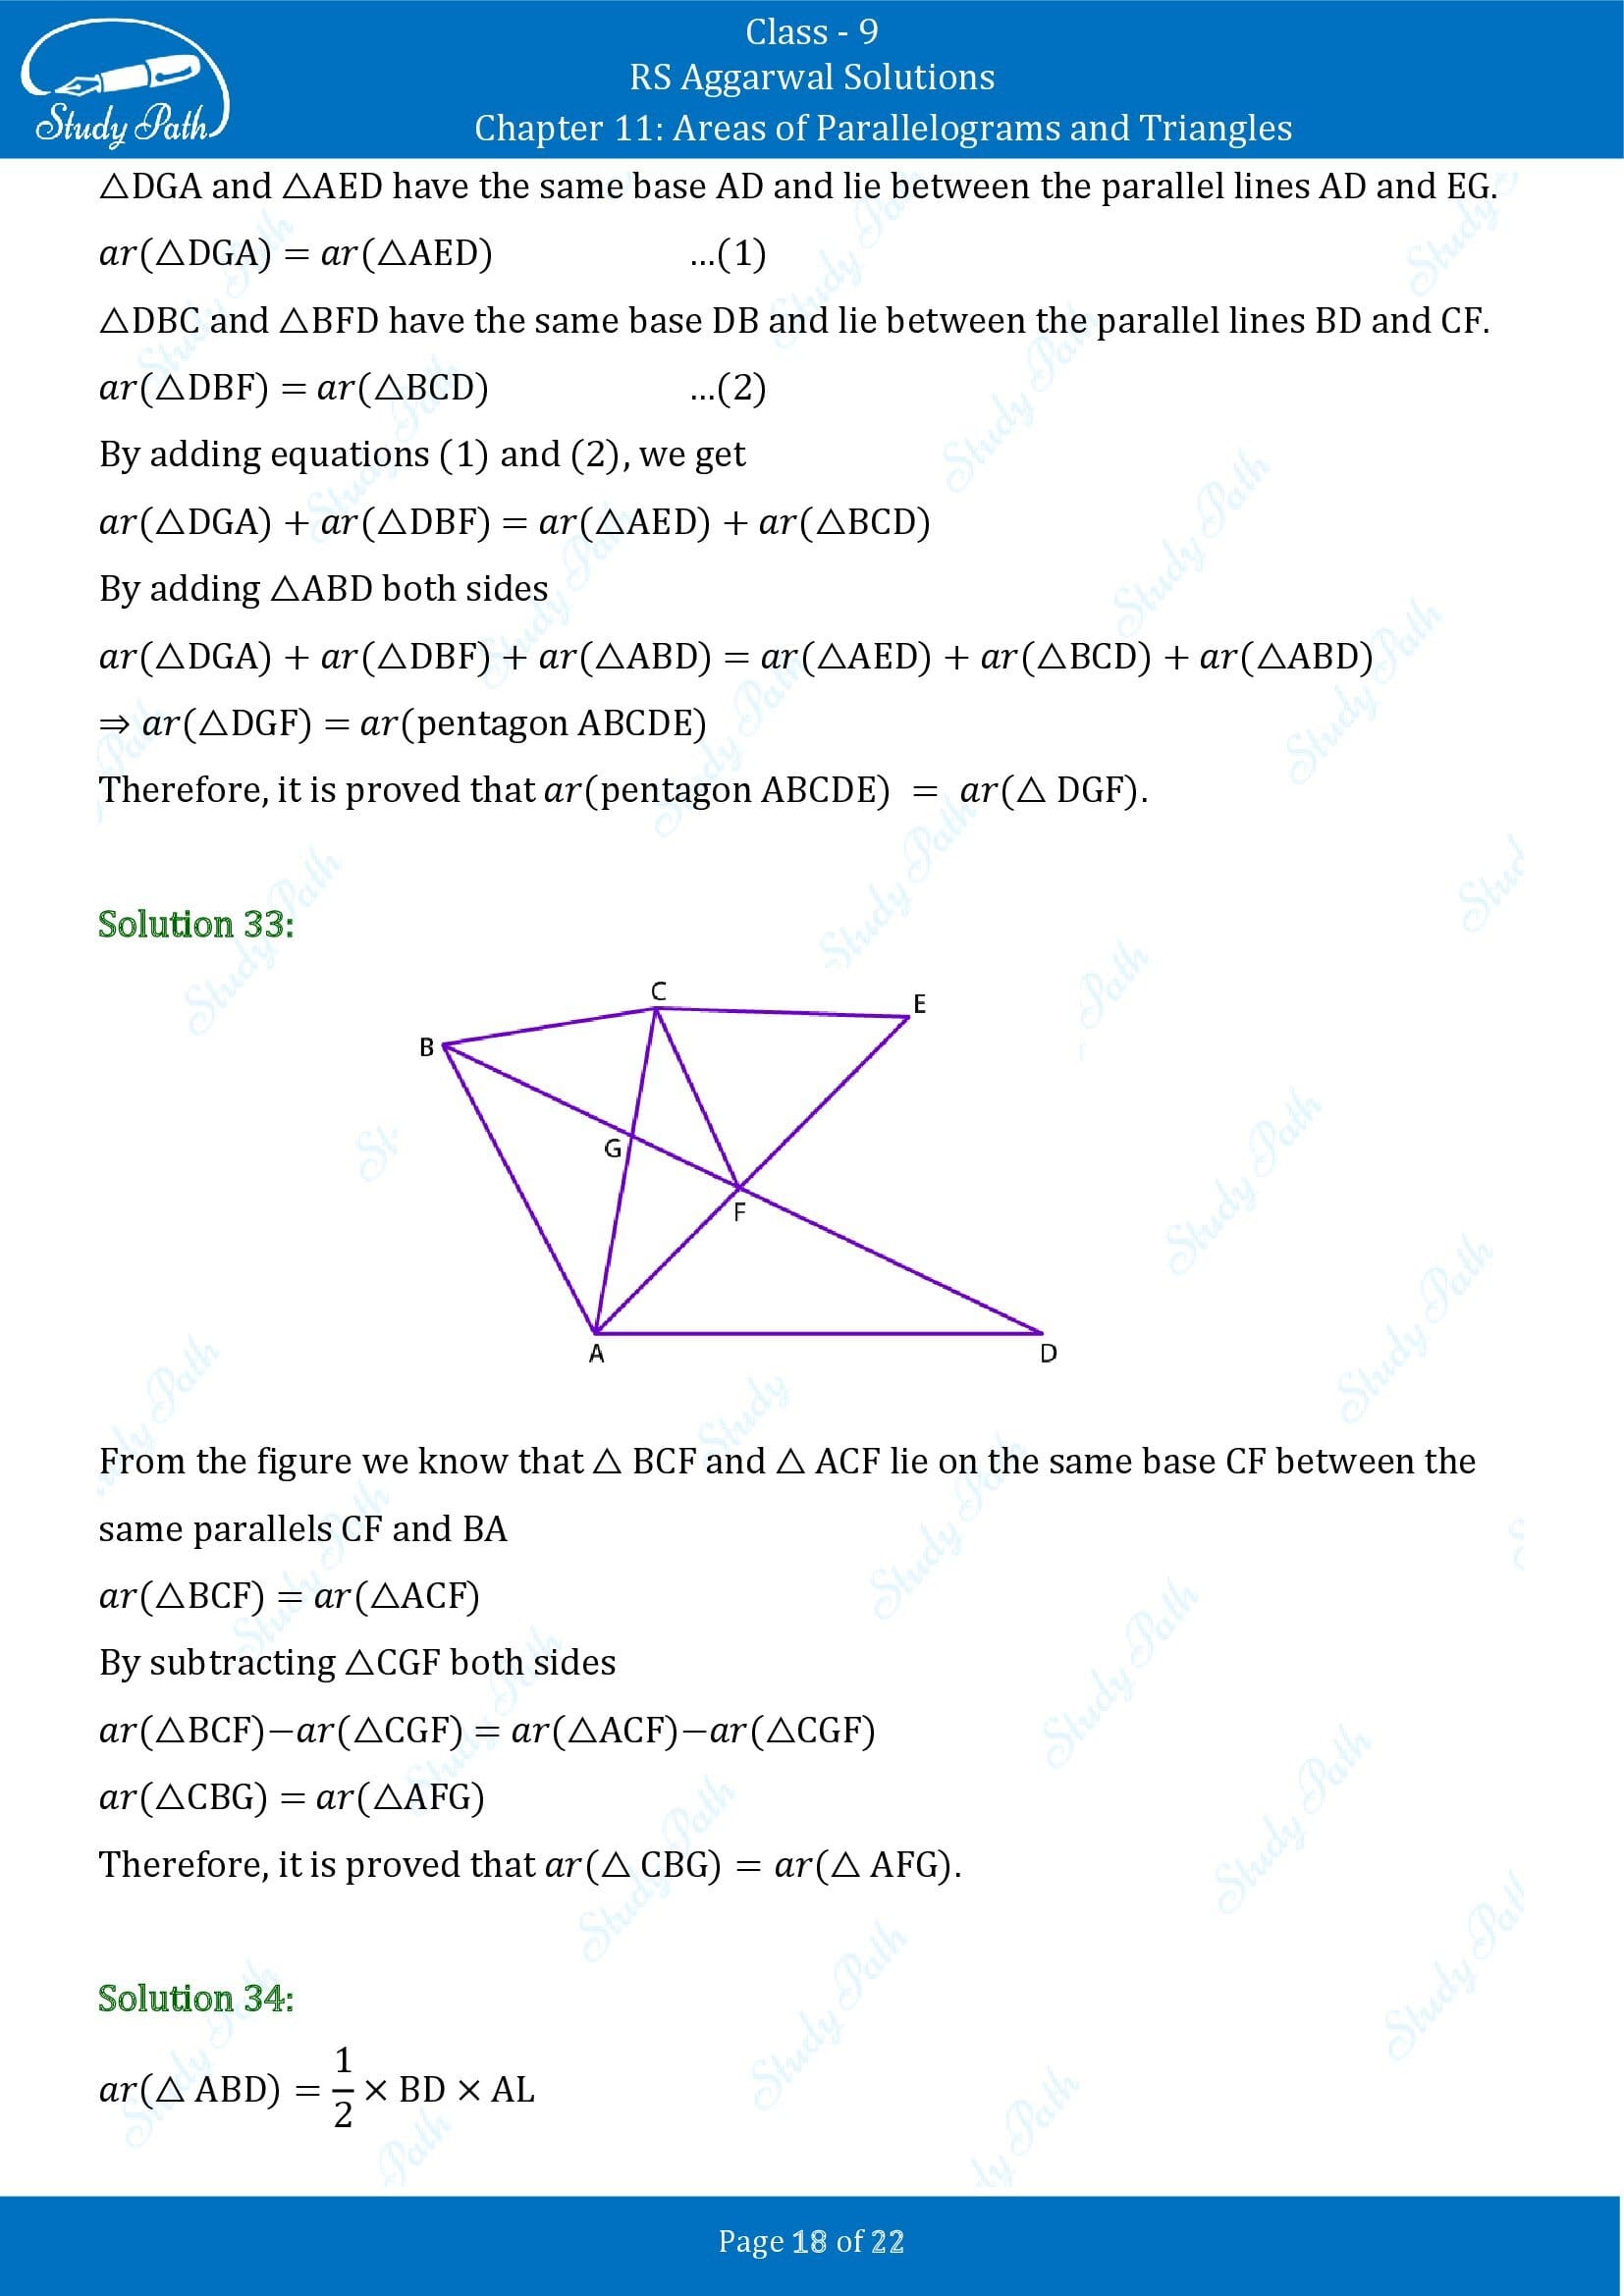 RS Aggarwal Solutions Class 9 Chapter 11 Areas of Parallelograms and Triangles Exercise 11 00018